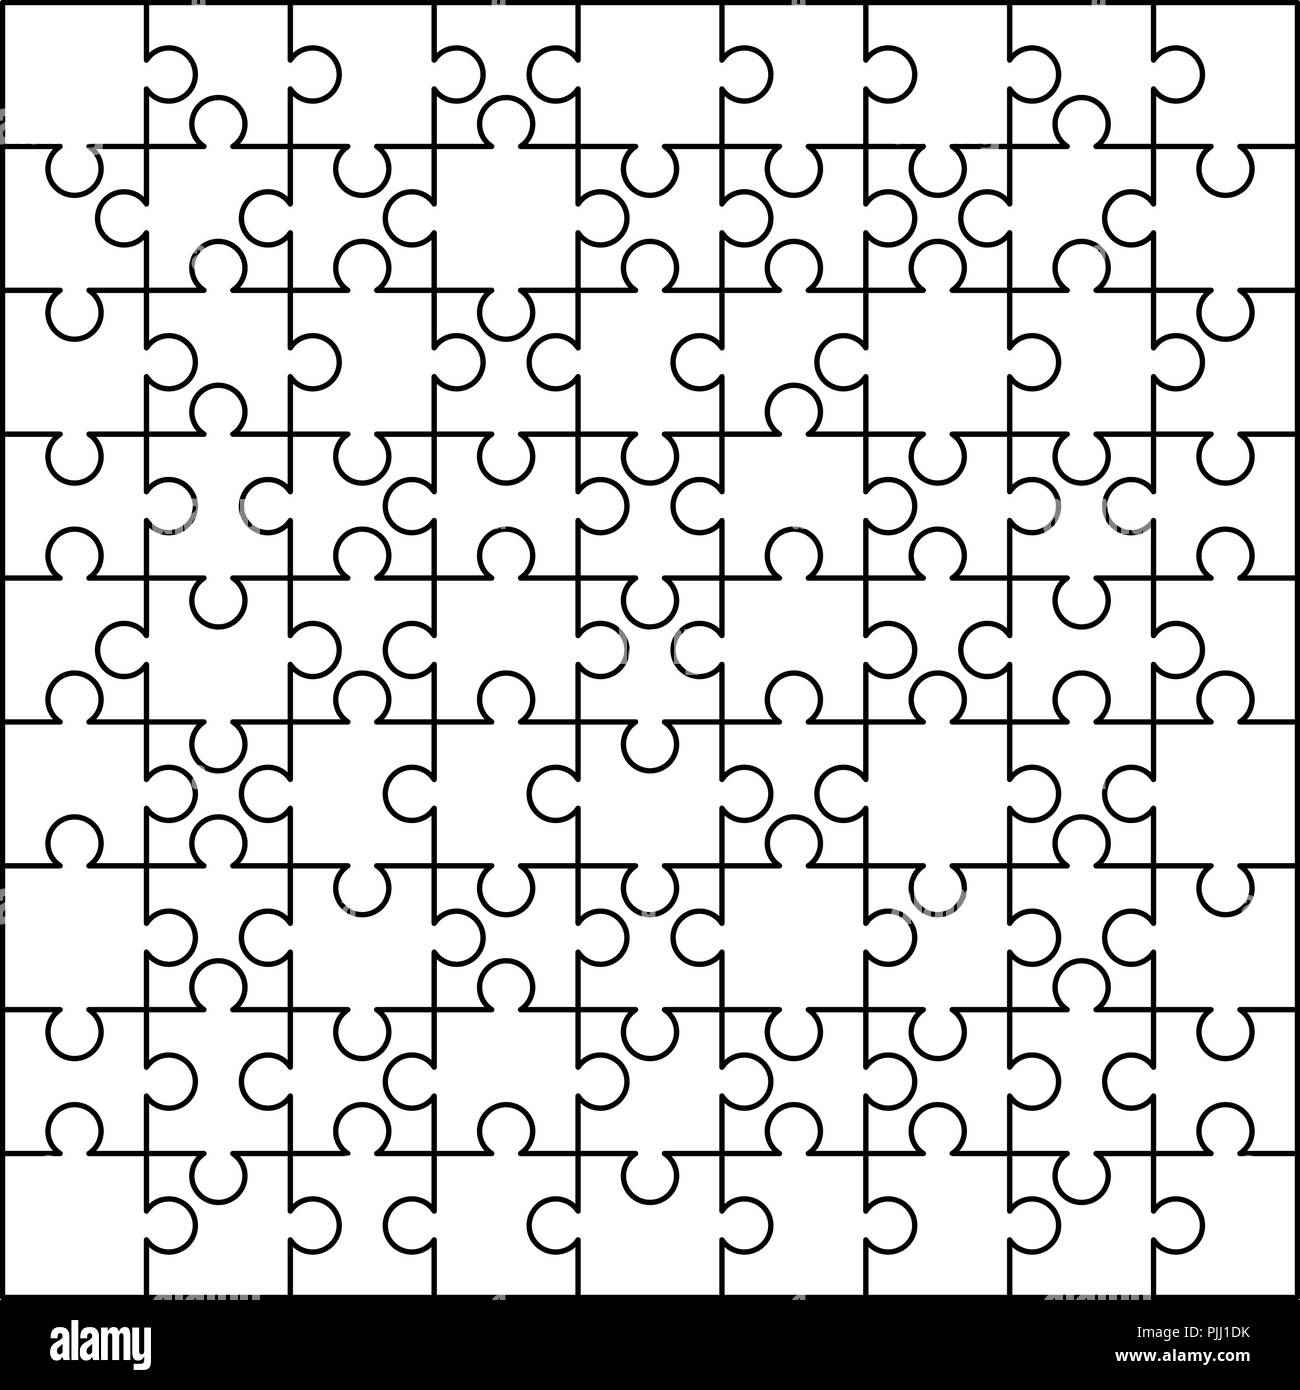 100 white puzzles pieces arranged in a square Jigsaw Puzzle template